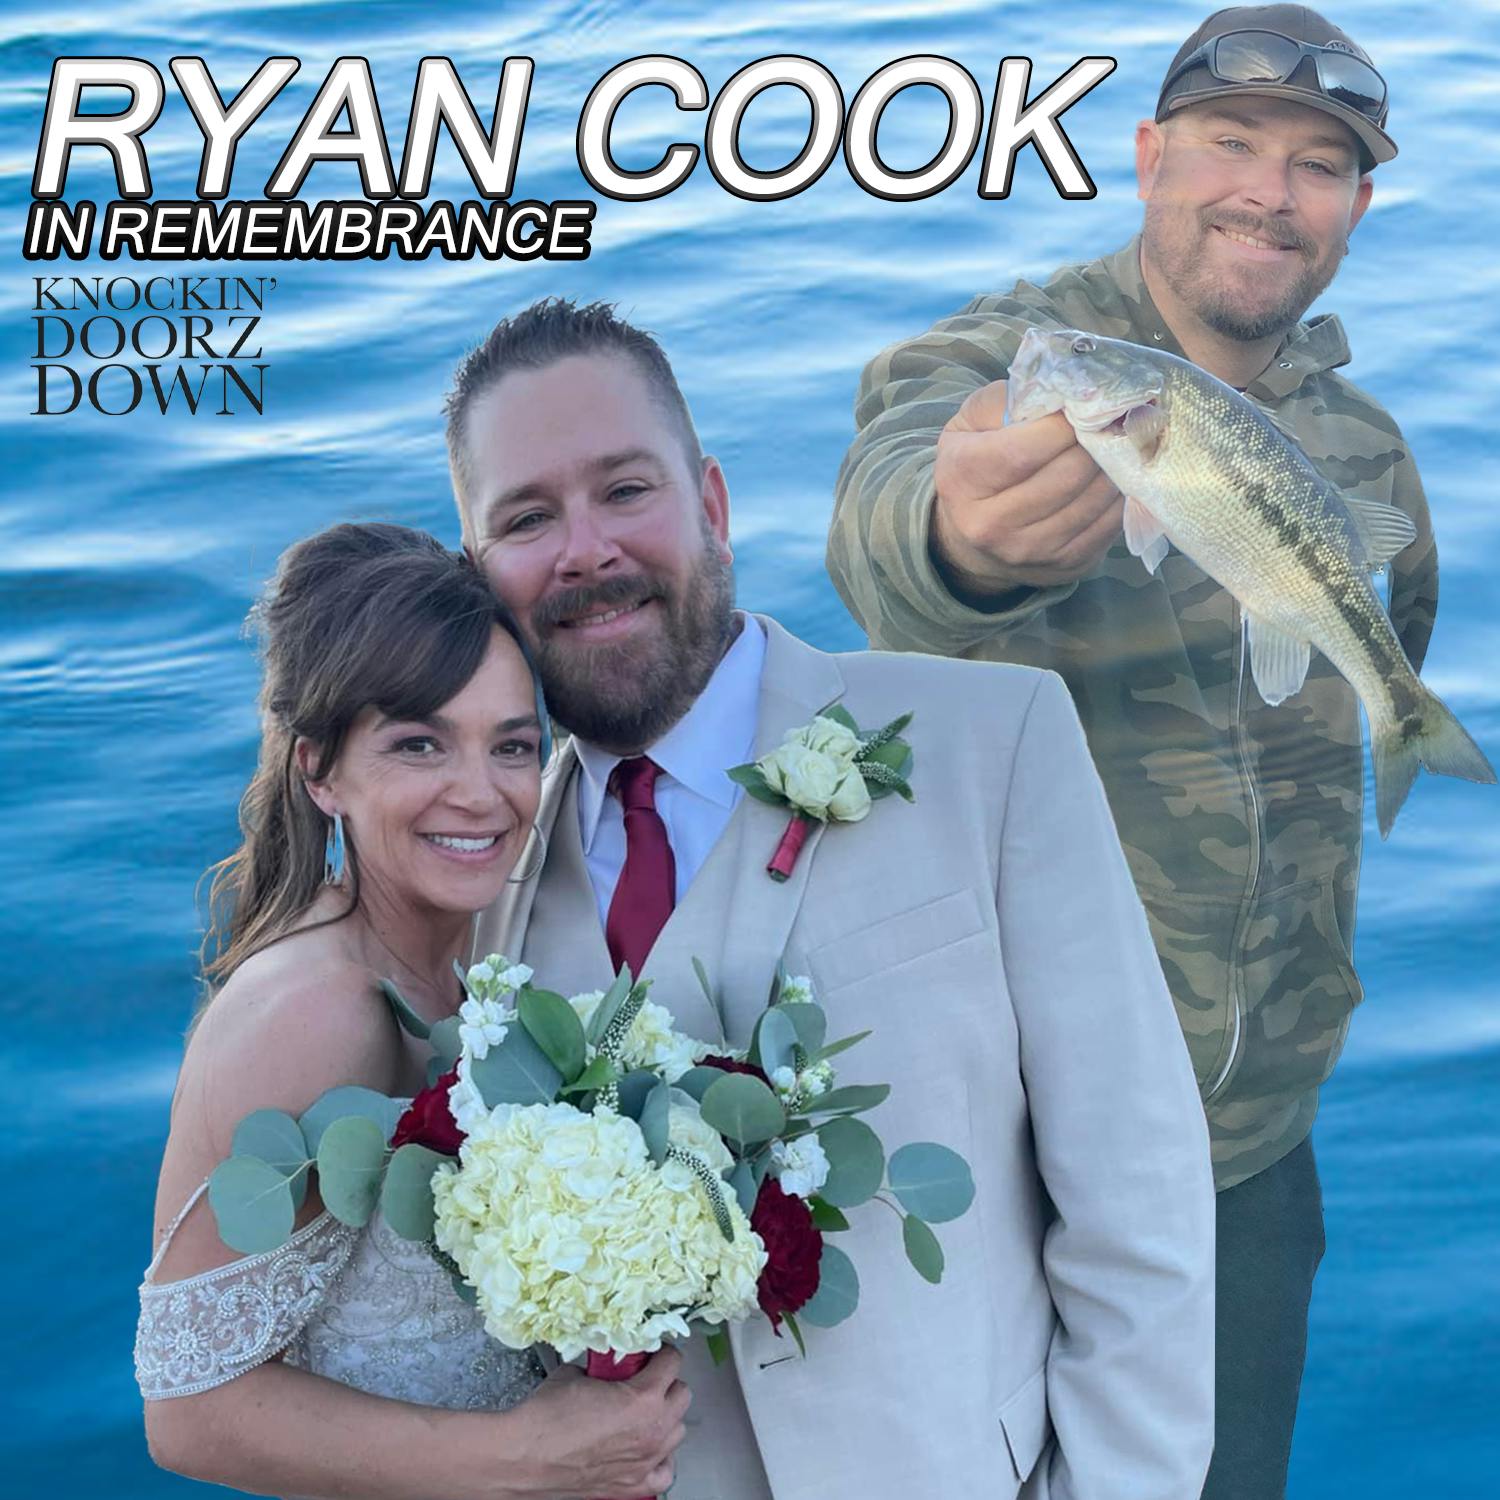 Ryan Cook | Remembering My Friend Who Lived Faith, Love, Hope & Believing Anyone Can Change